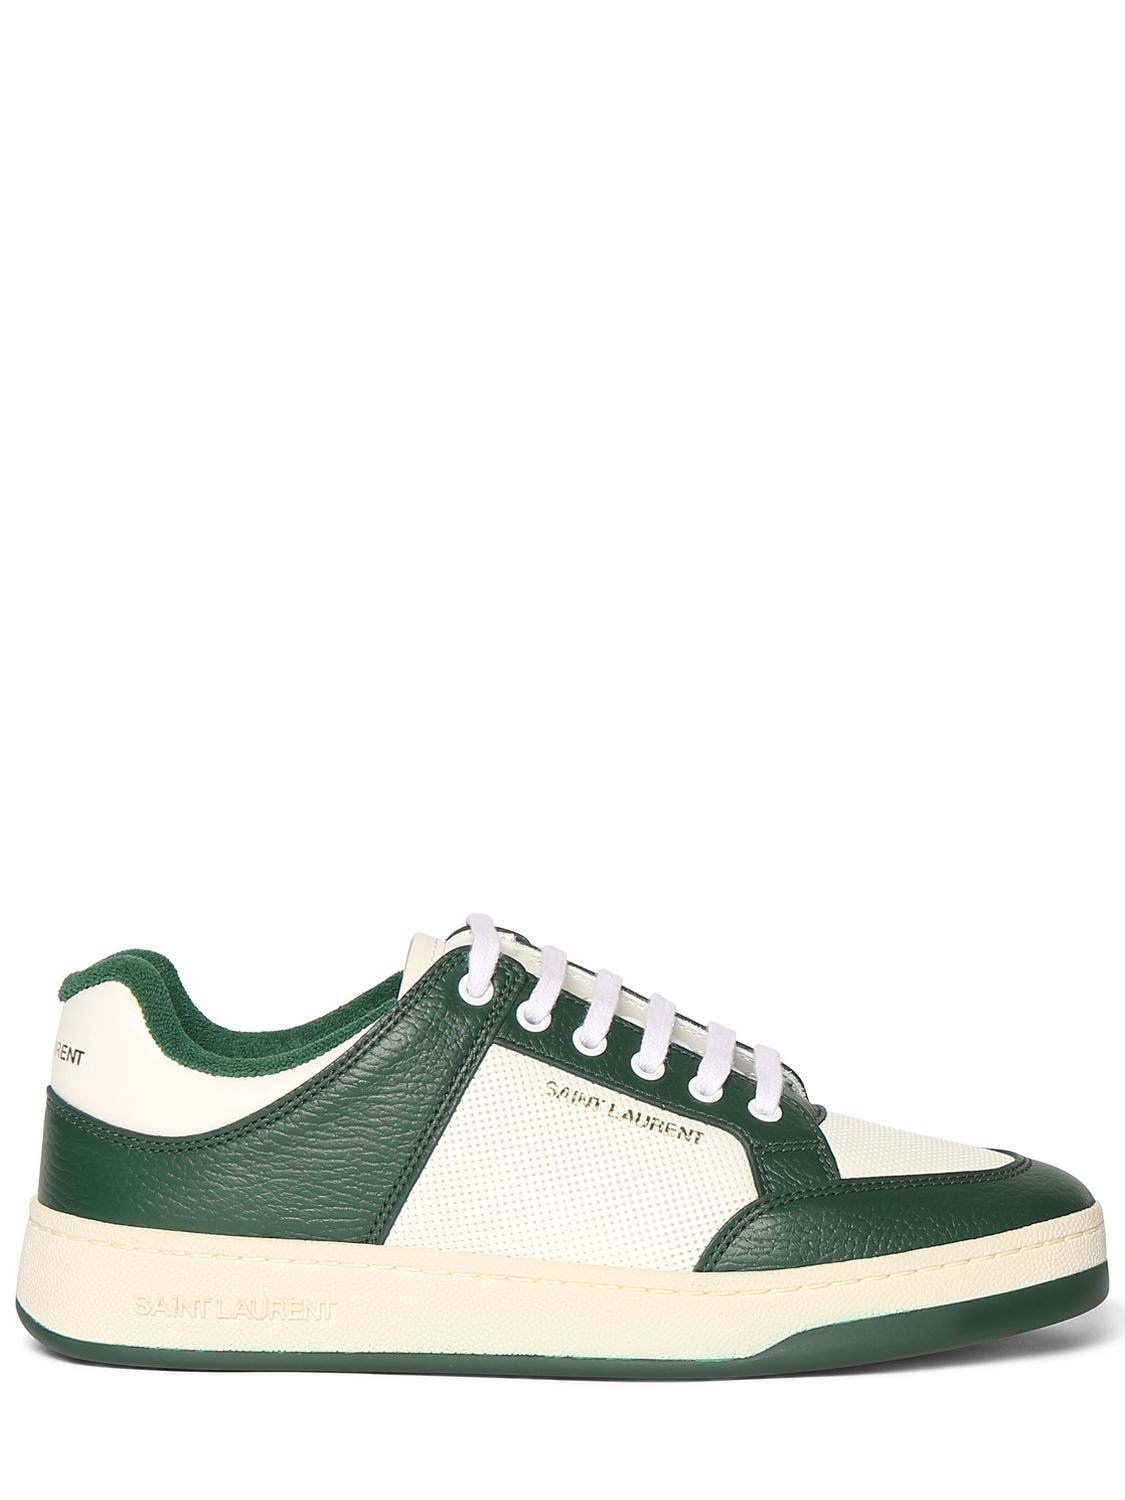 Image of Sl/61 00 Leather Sneakers